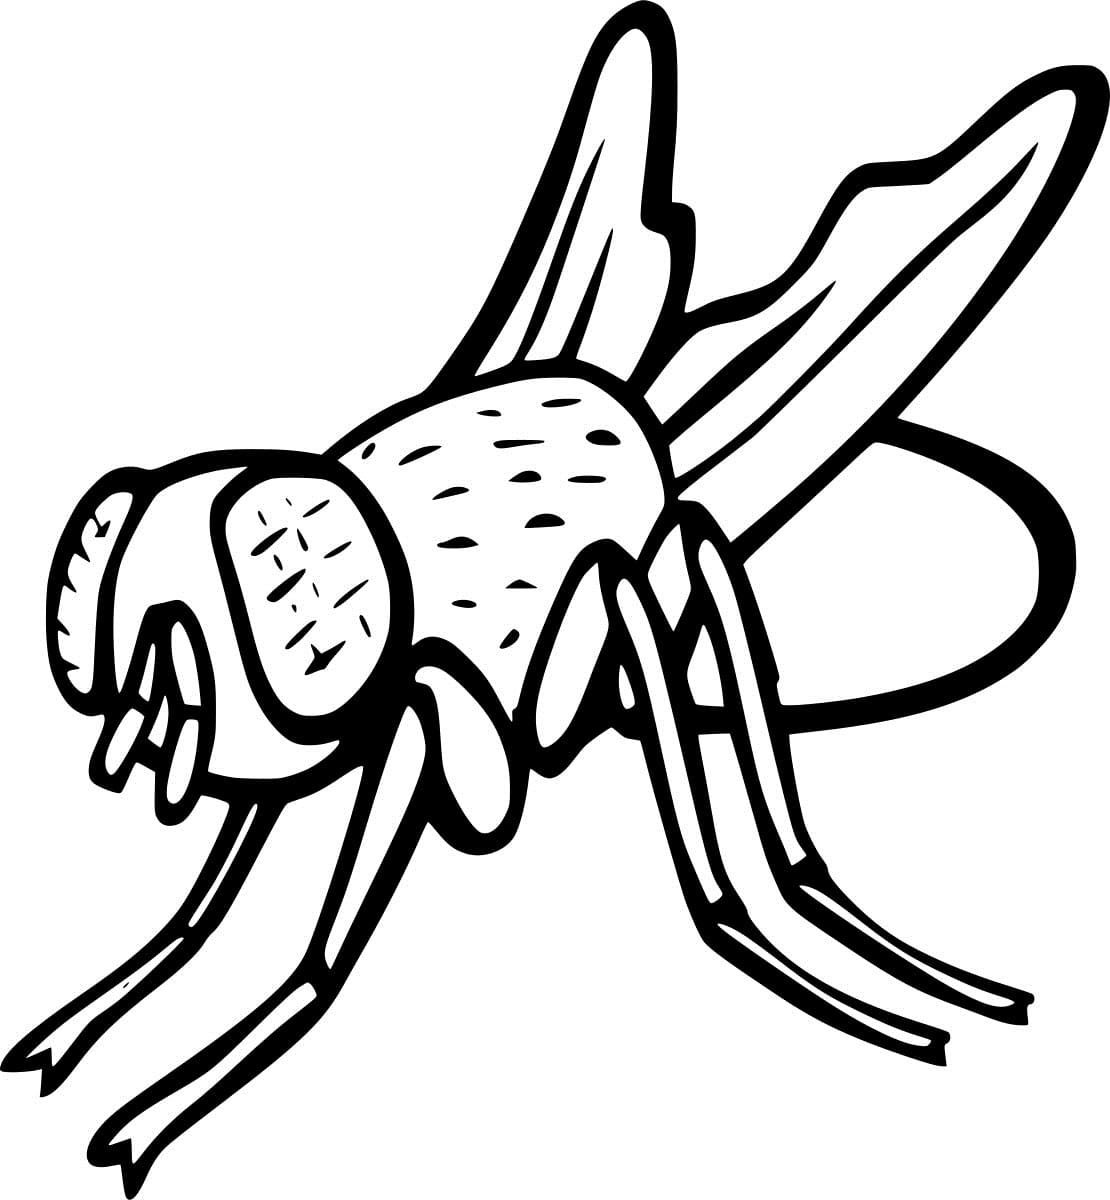 Easy Fly Flying Image Coloring Page